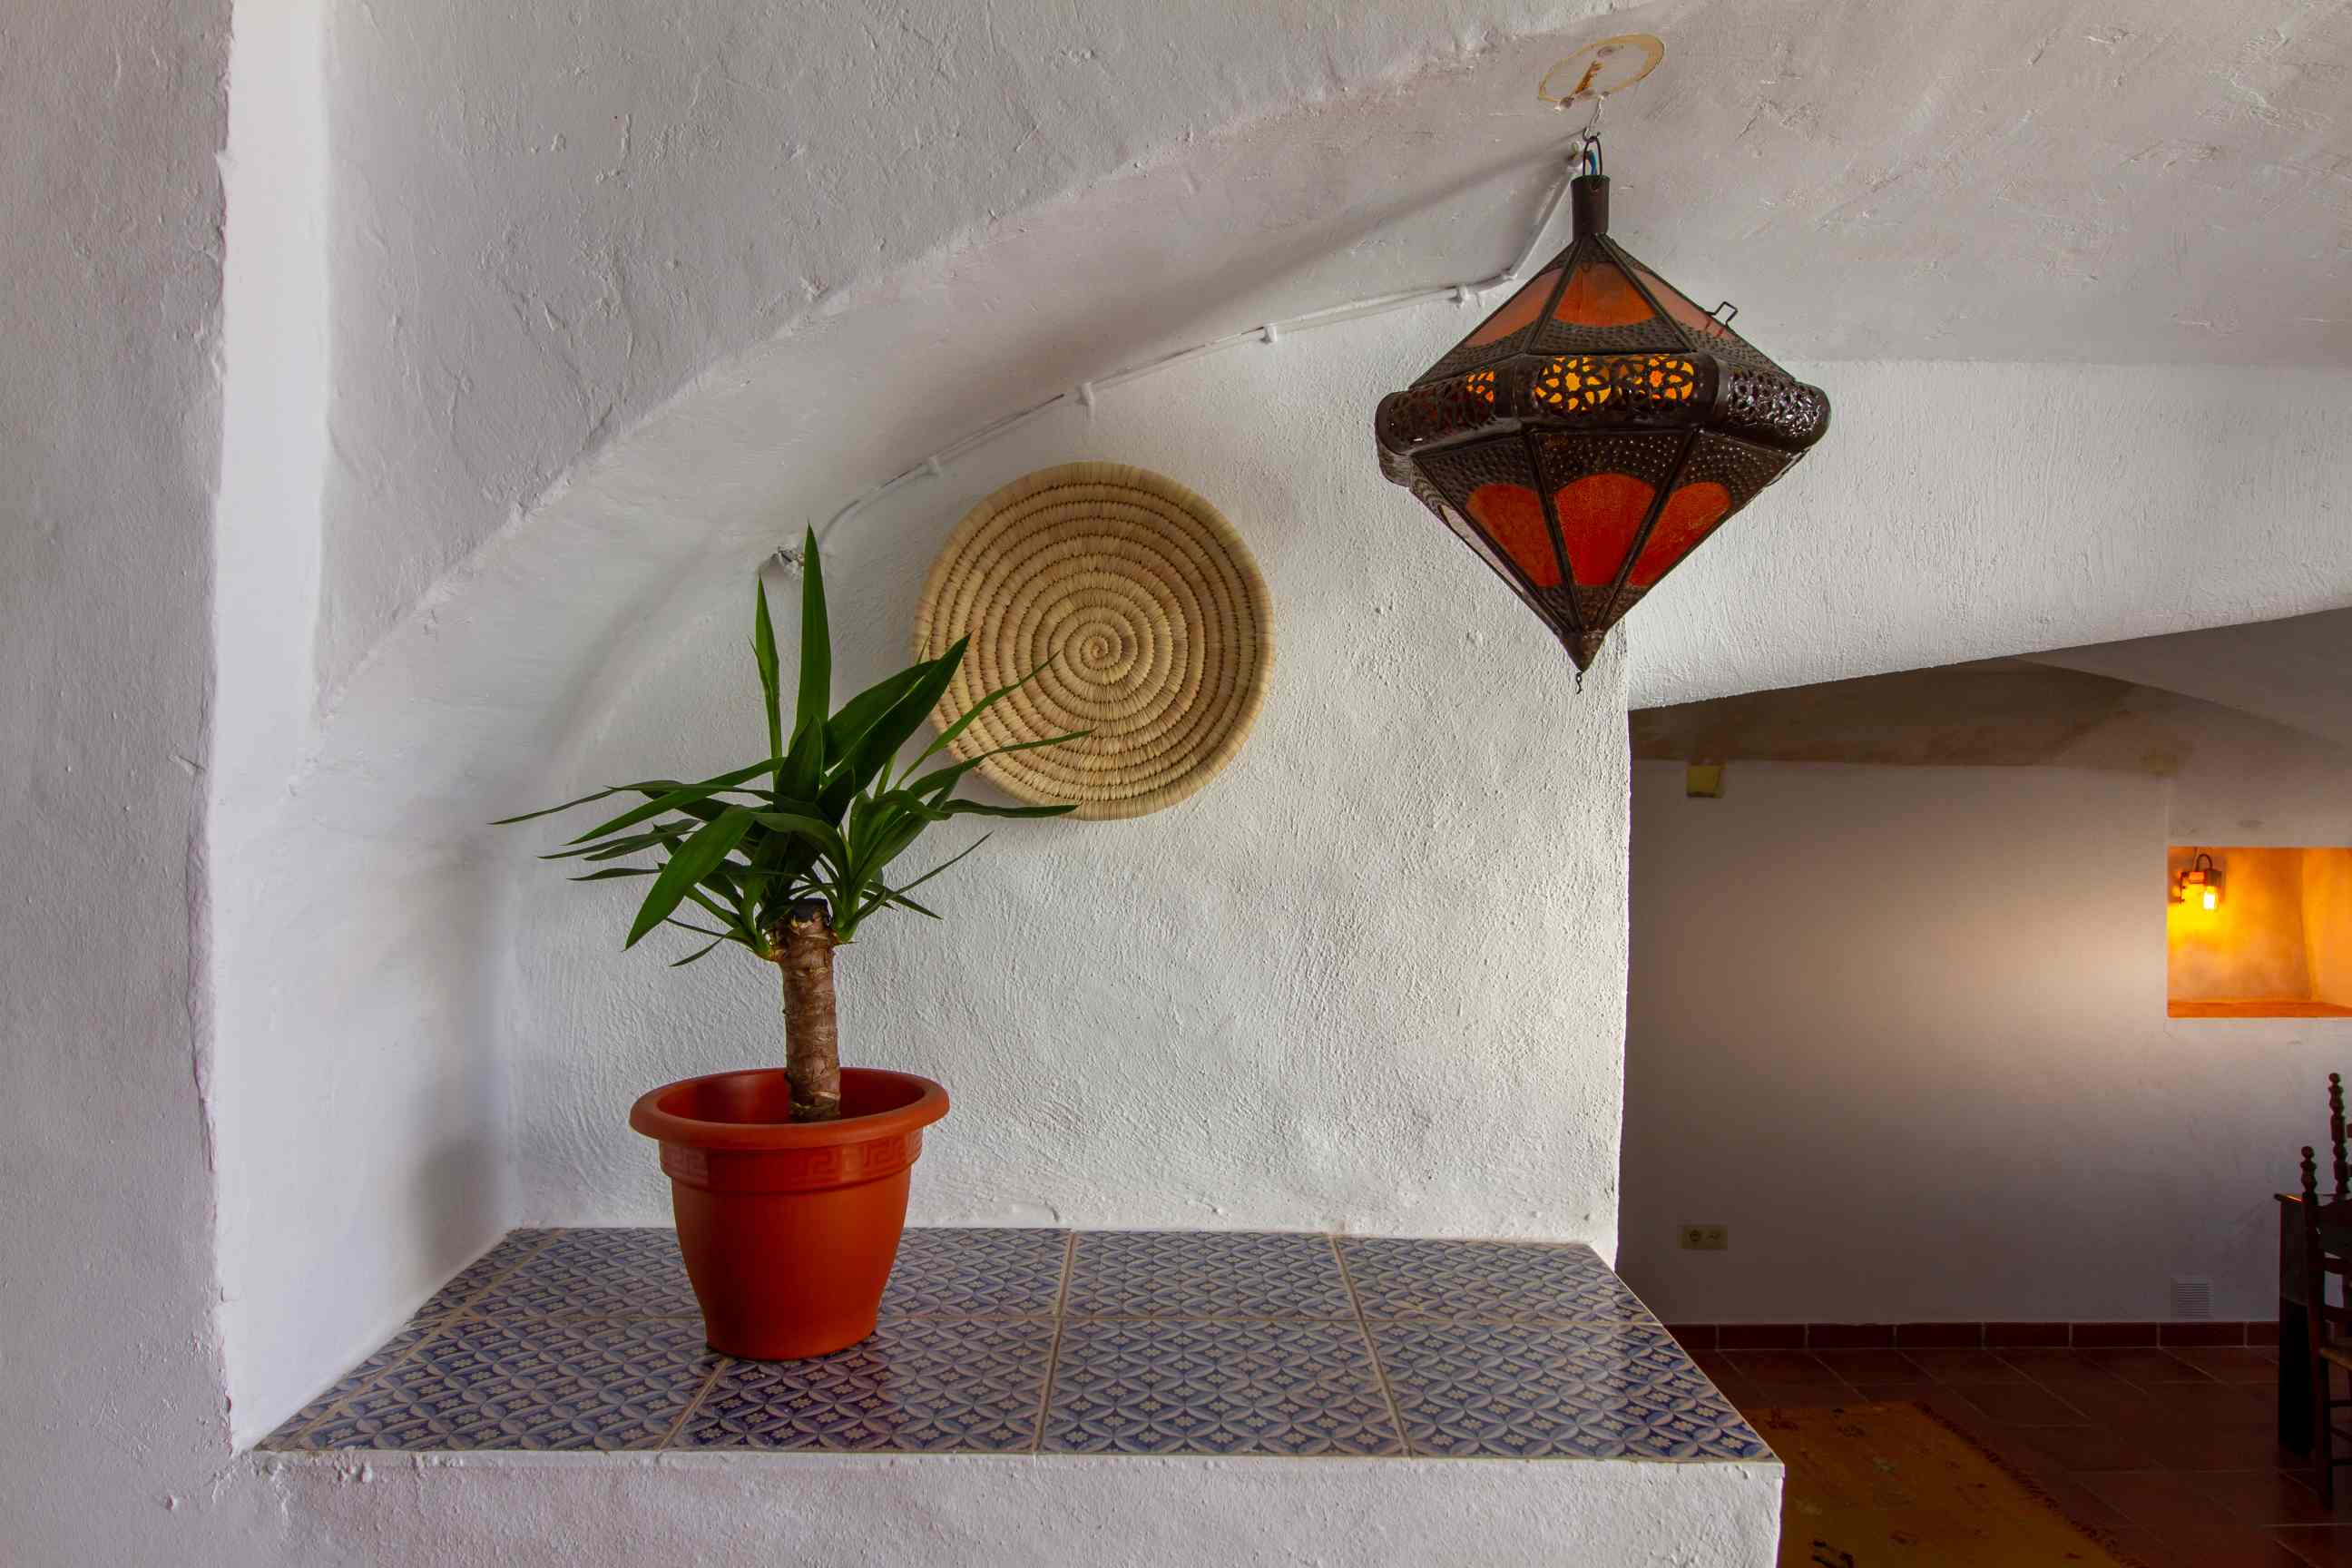 Charming House in the Old Town of Polop: Discover its History and Charm